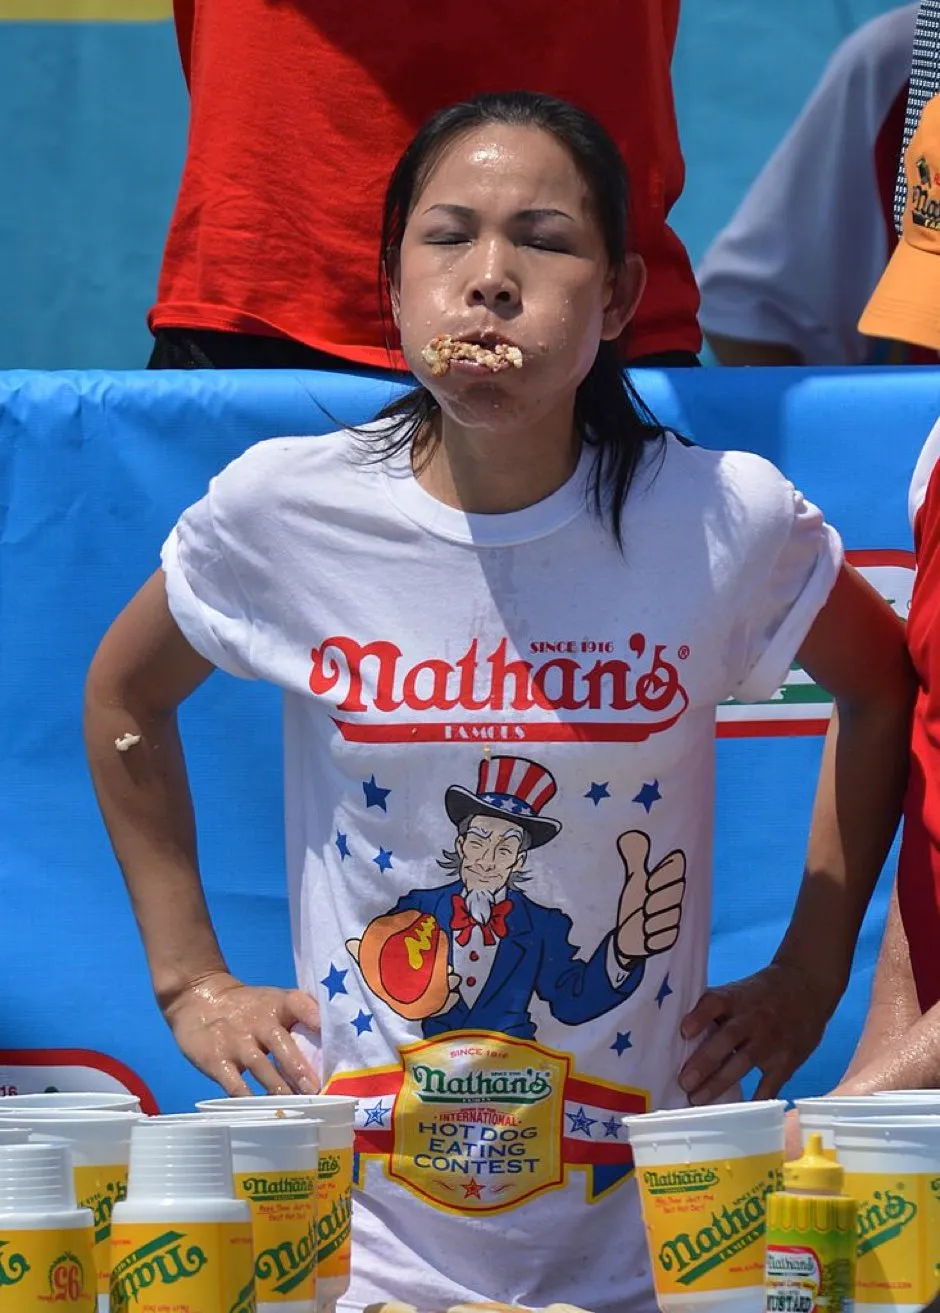 Women’s Hot Dog Eating World Championship, Sonya “The Black Widow” Thomas during Nathan’s Famous Fourth of July International Hot Dog Eating Contest July 4, 2012 in the Coney Island section of New York. Thomas won by eating 45 hot dogs and buns in ten minutes. AFP PHOTO/Stan HONDA (Photo credit should read STAN HONDA/AFP/GettyImages)